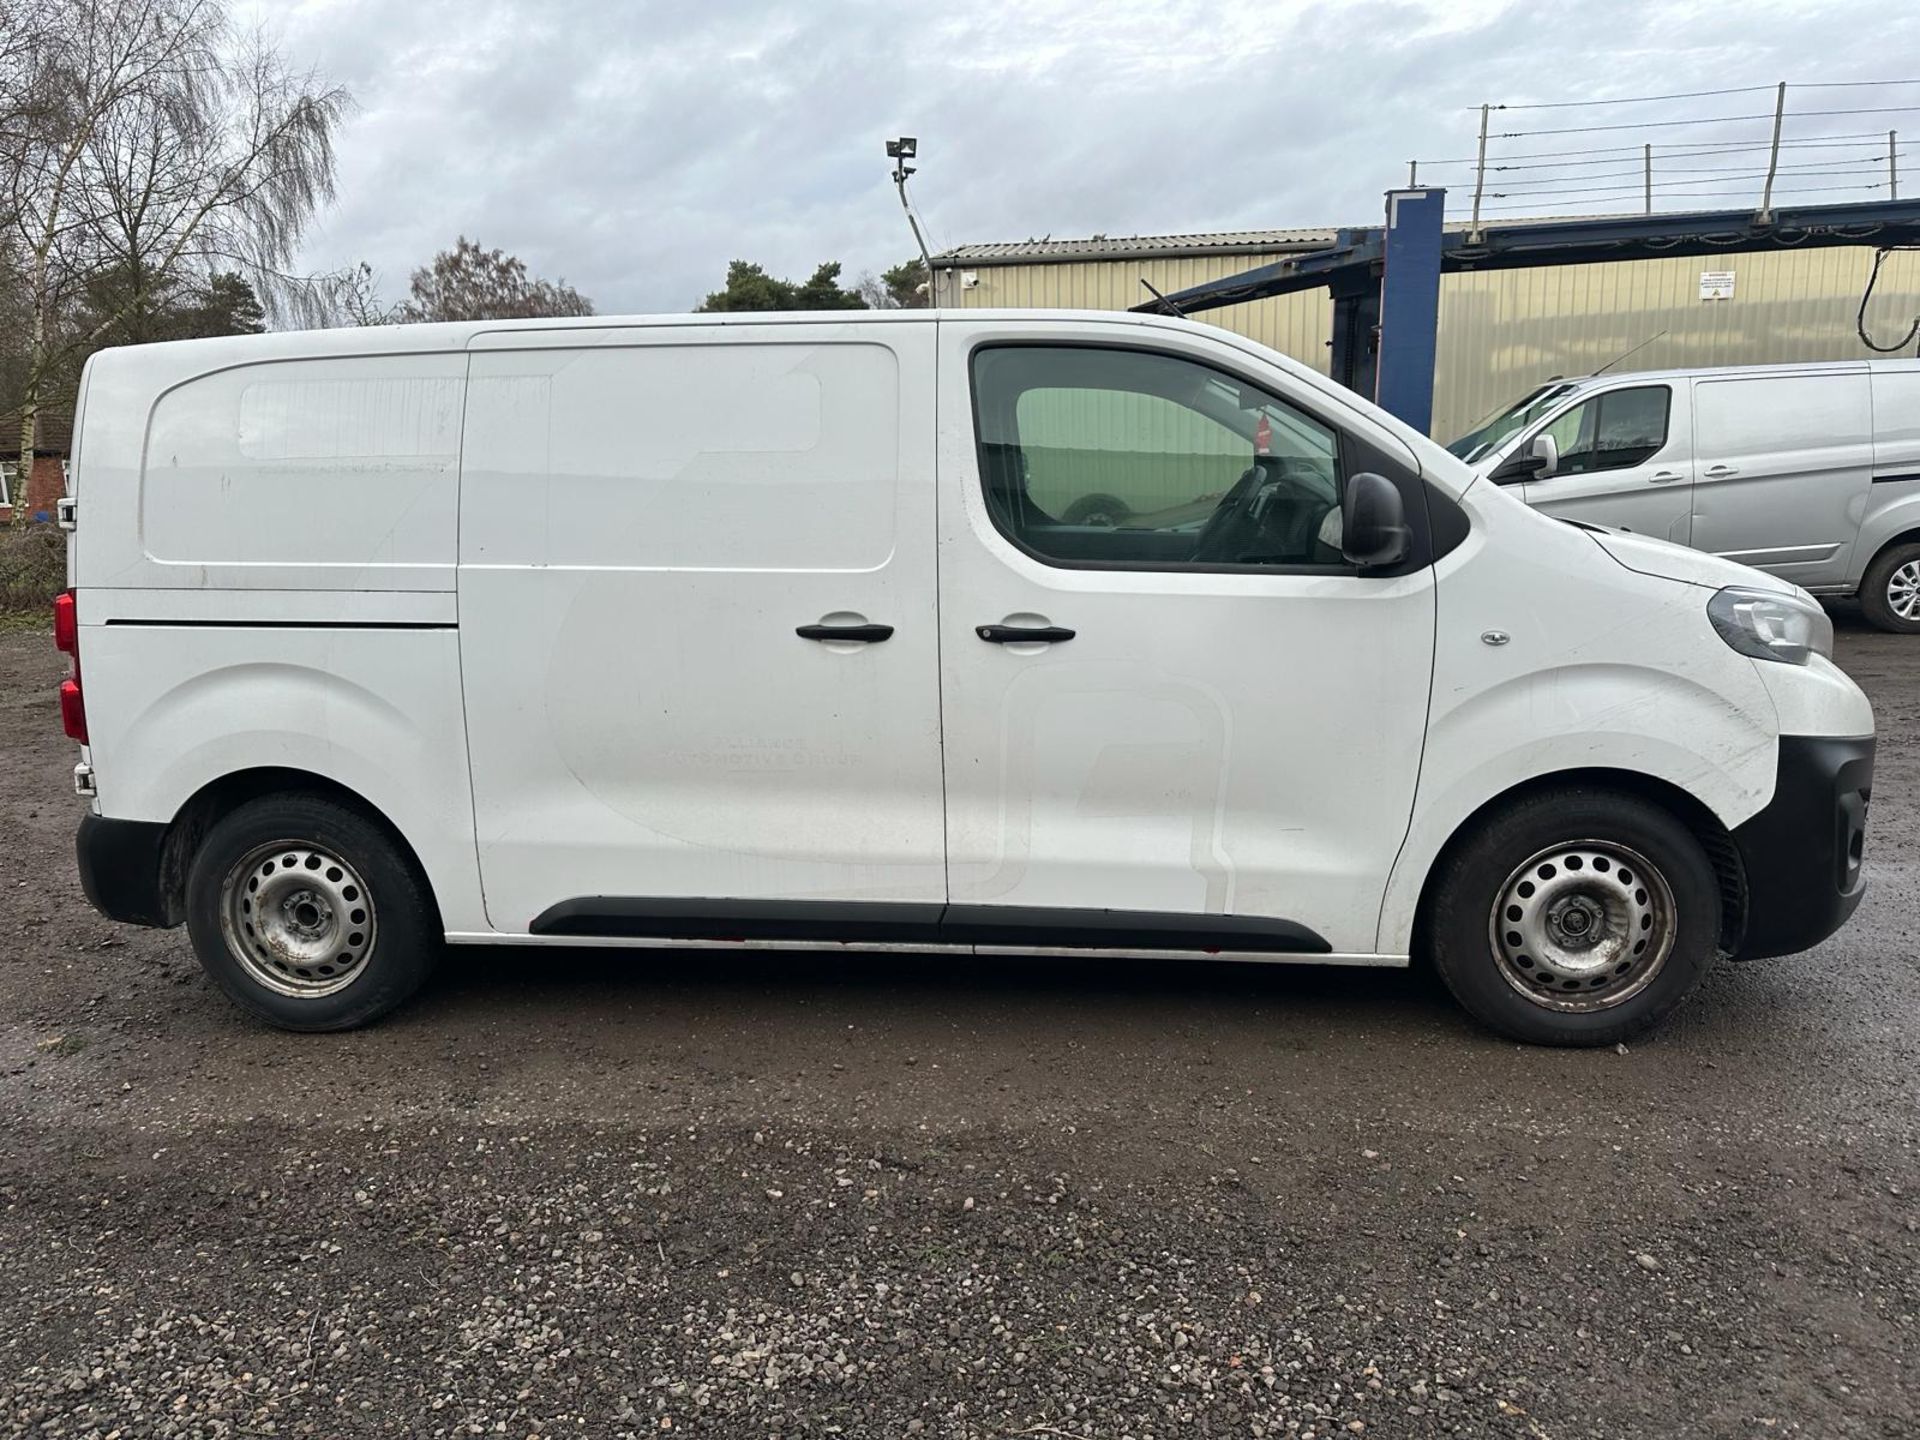 2019 69 PEUGEOT EXPERT PANEL VAN - 140K MILES - AIR CON - PLY LINED - Image 7 of 10